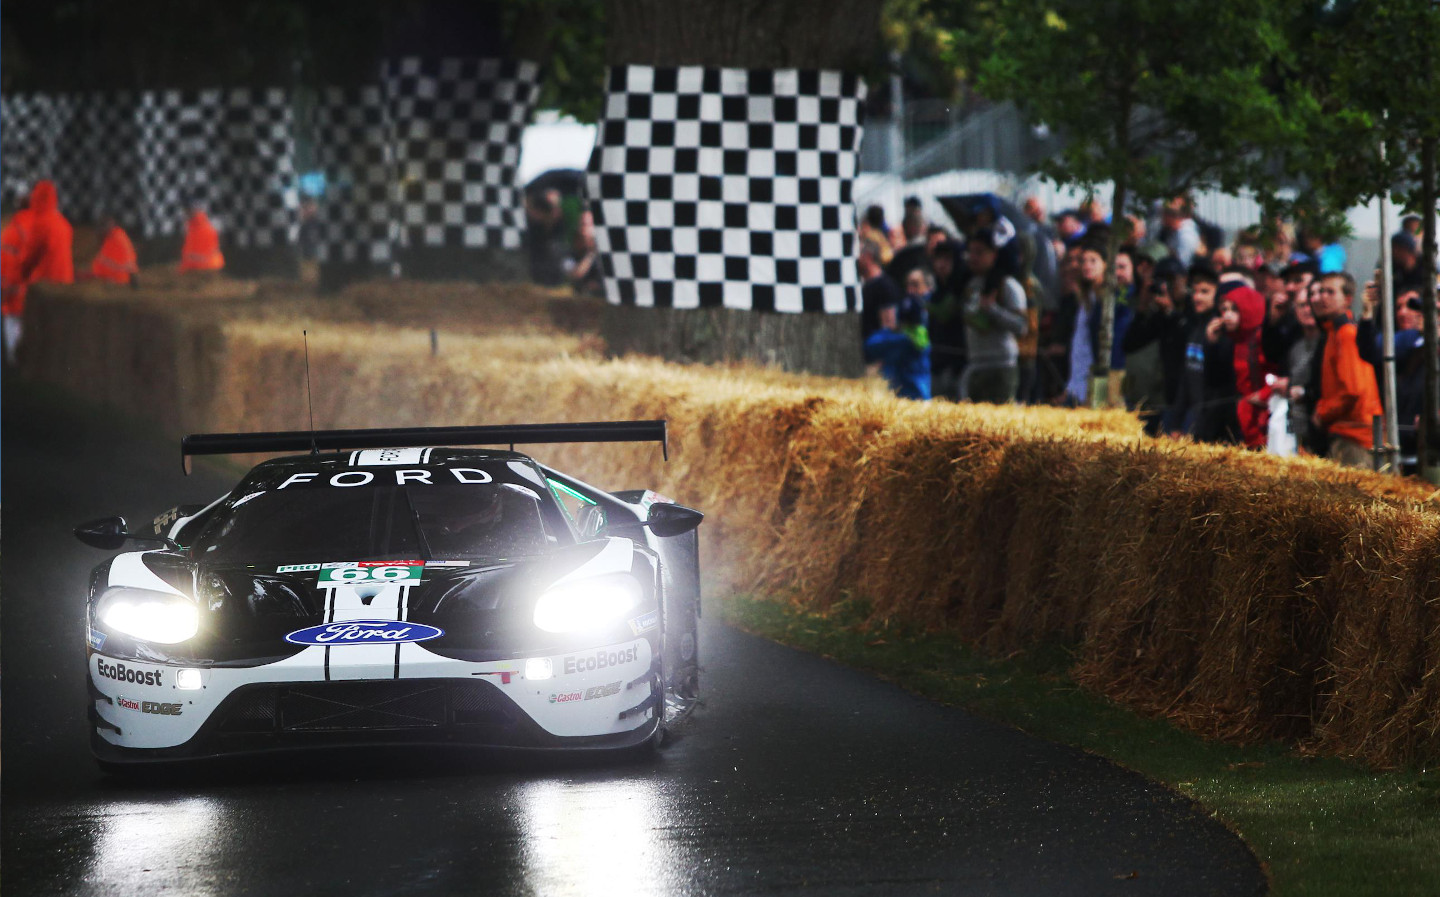 Goodwood Festival of Speed 2020 cancelled